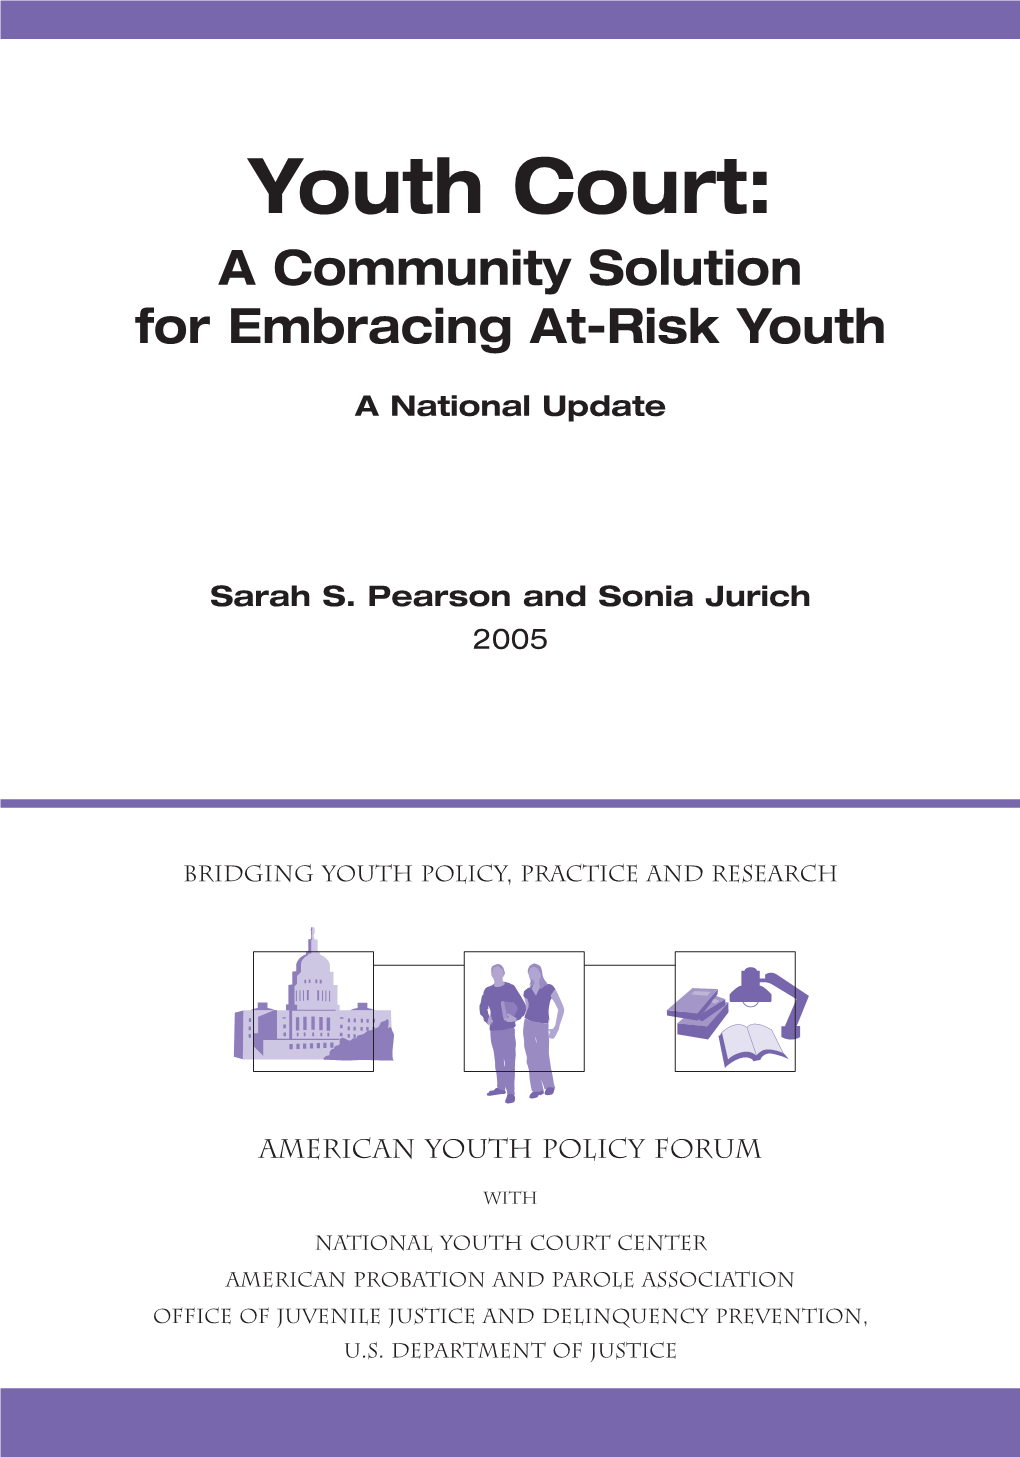 Youth Court: a Community Solution for Embracing At-Risk Youth